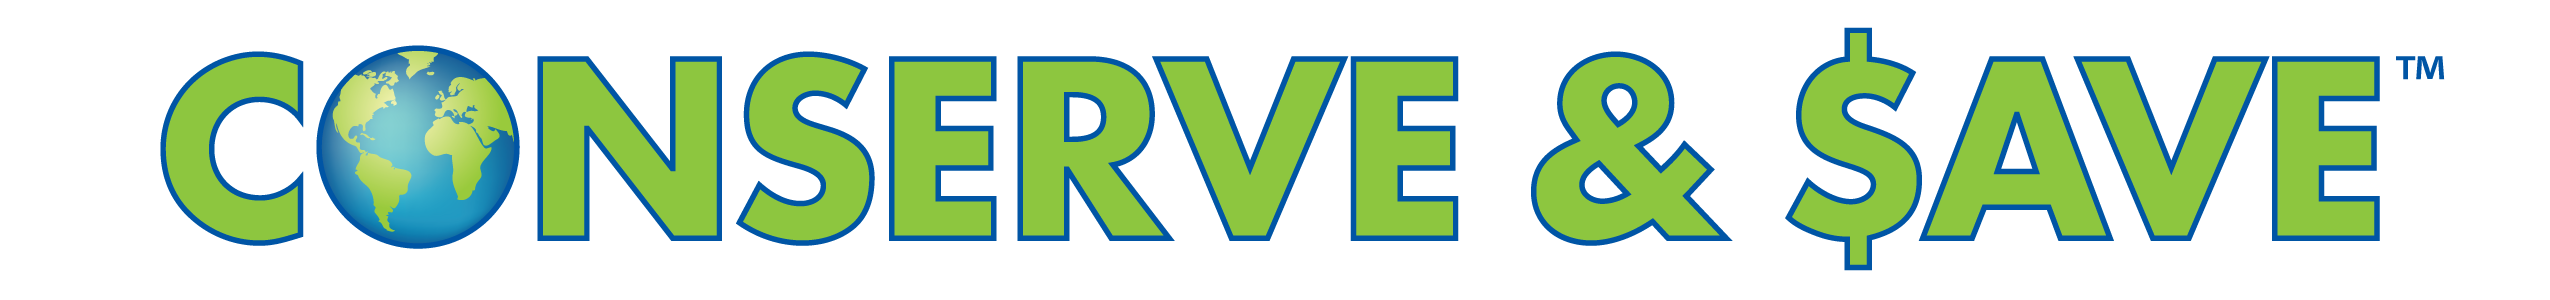 Conserve and Save logo